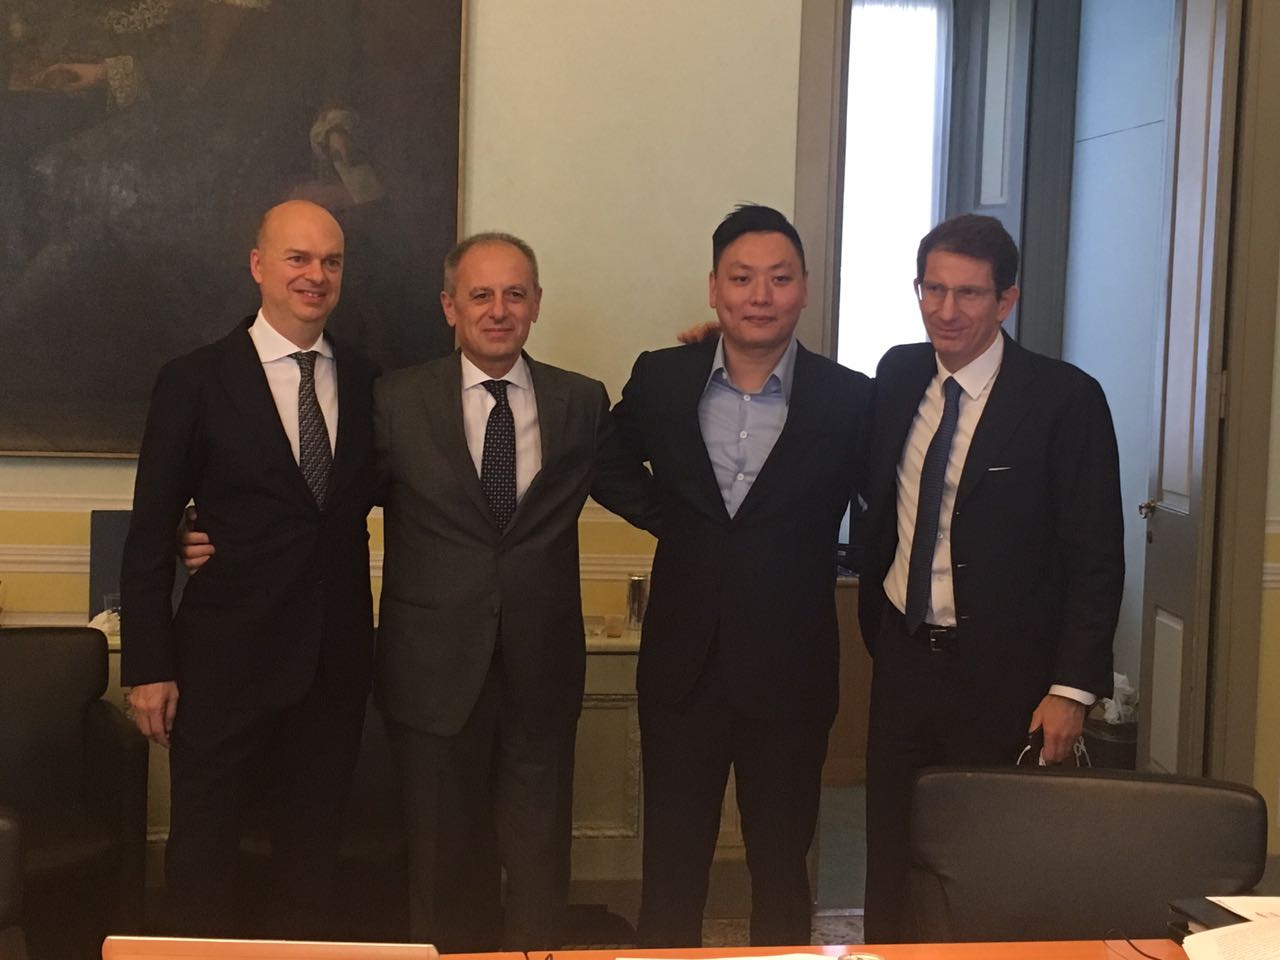 AC Milan: the sale from Fininvest to Rossoneri Sport Investment Lux of a 99.9% stake of the club has been finalized